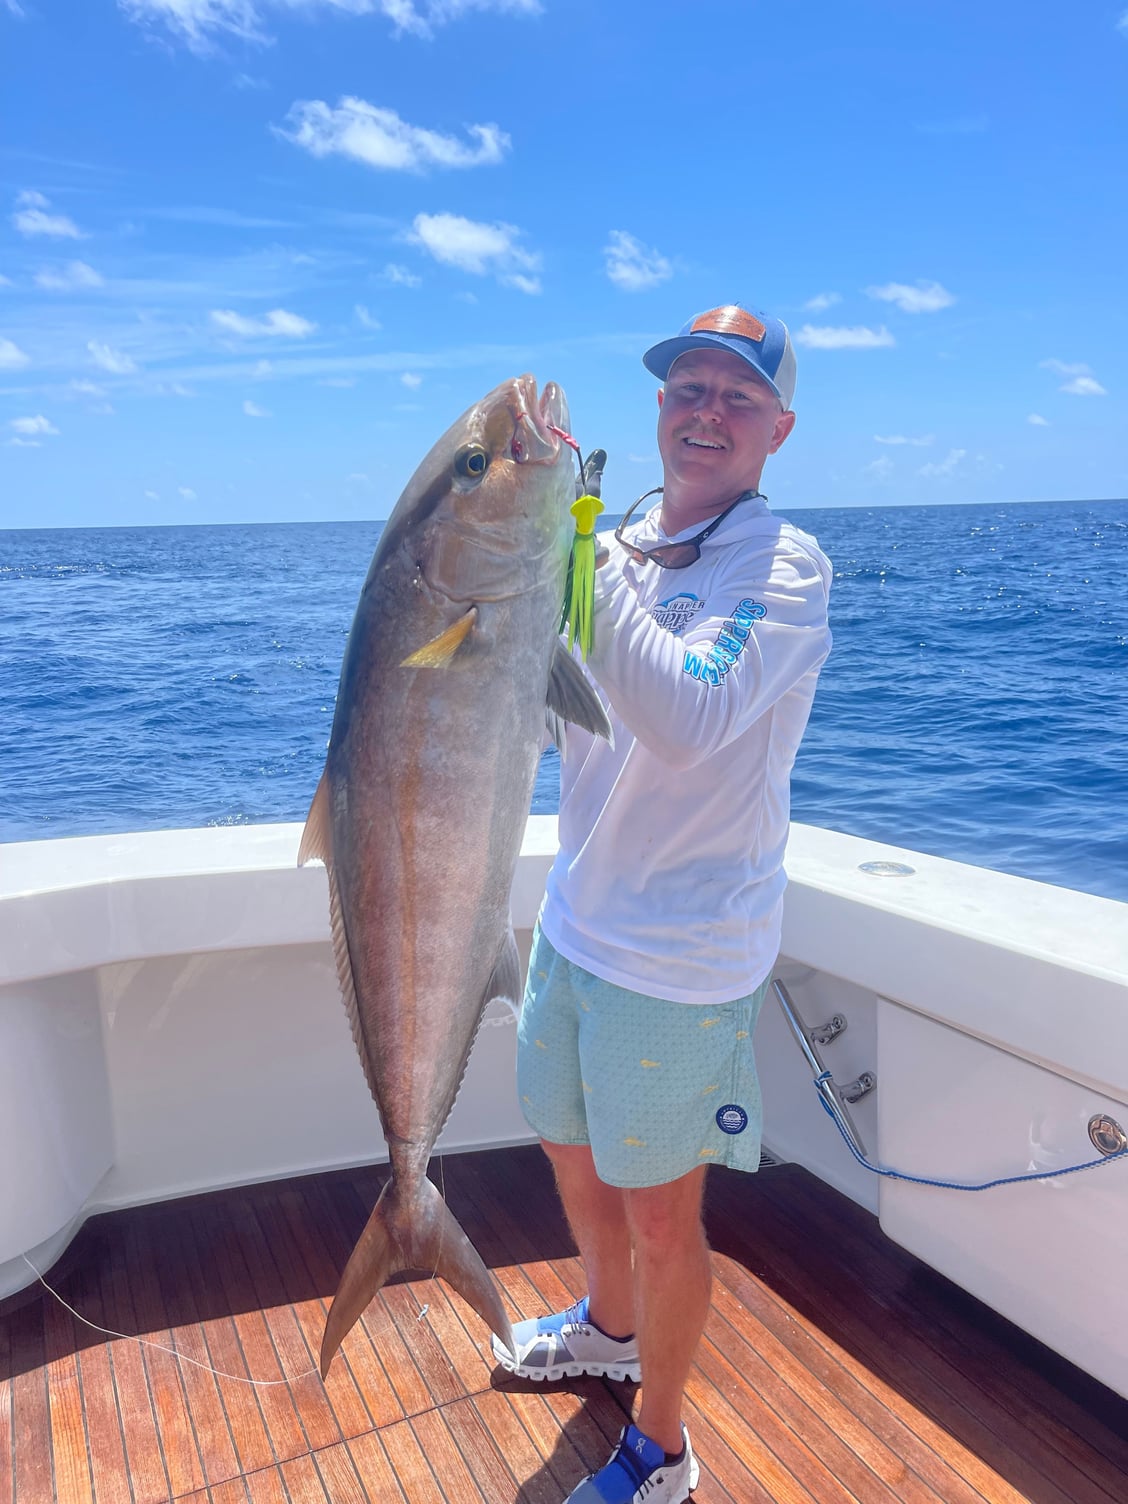 Snapper Slapper Lures - Page 3 - The Hull Truth - Boating and Fishing Forum